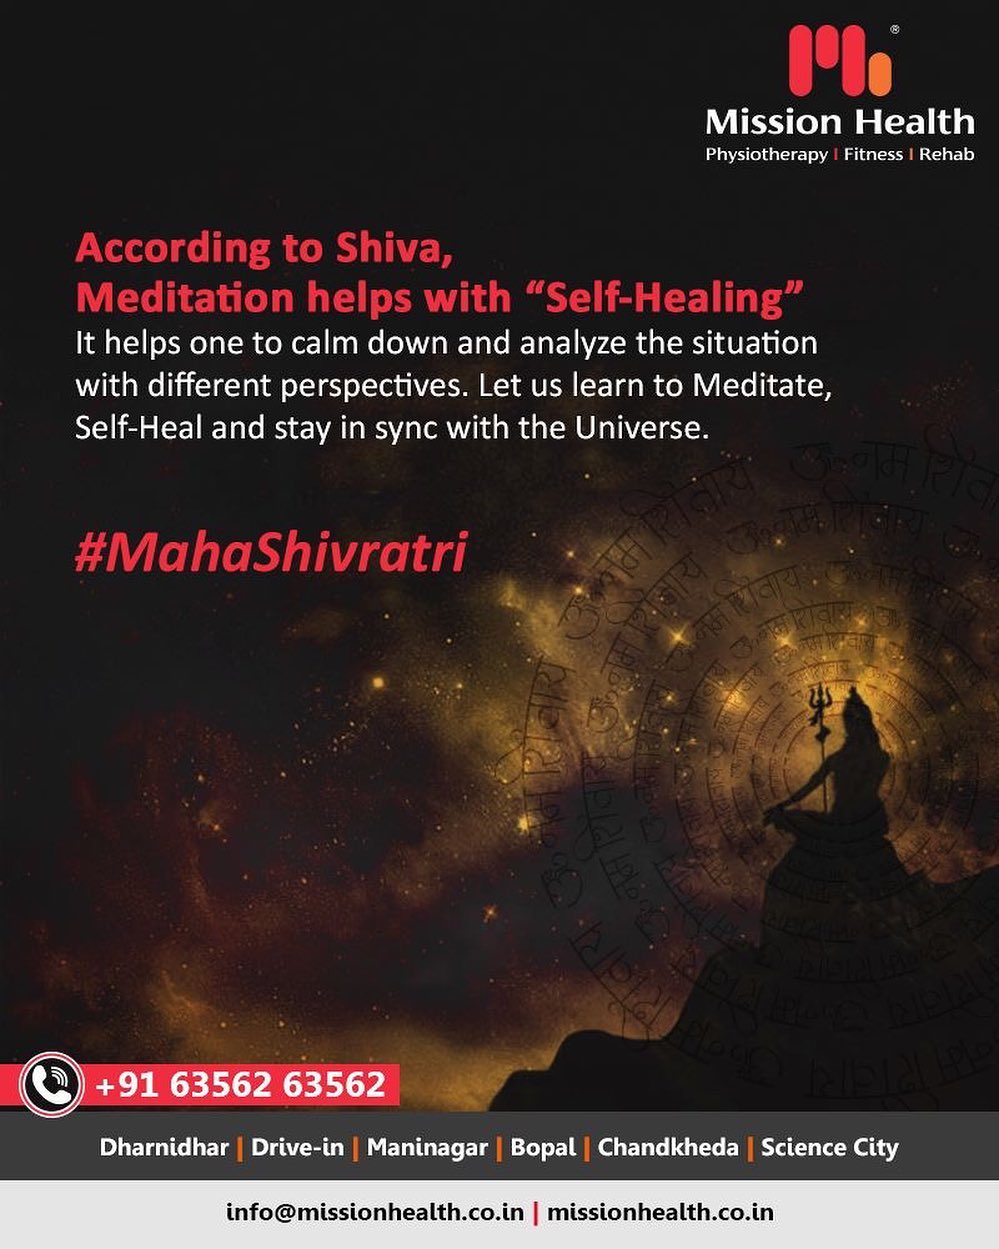 According to Shiva, Meditation helps with “Self-Healing”. It helps one to calm down and analyze the situation with different perspectives. Let us learn to Meditate, Self-Heal and stay in sync with the Universe.

#Shivratri #Shivratri2020 #LordShiva #Shiva #MahaShivratri2020 #HarHarMahadev #महाशिवरात्रि #MissionHealth #MissionHealthIndia #AbilityClinic #MovementIsLife